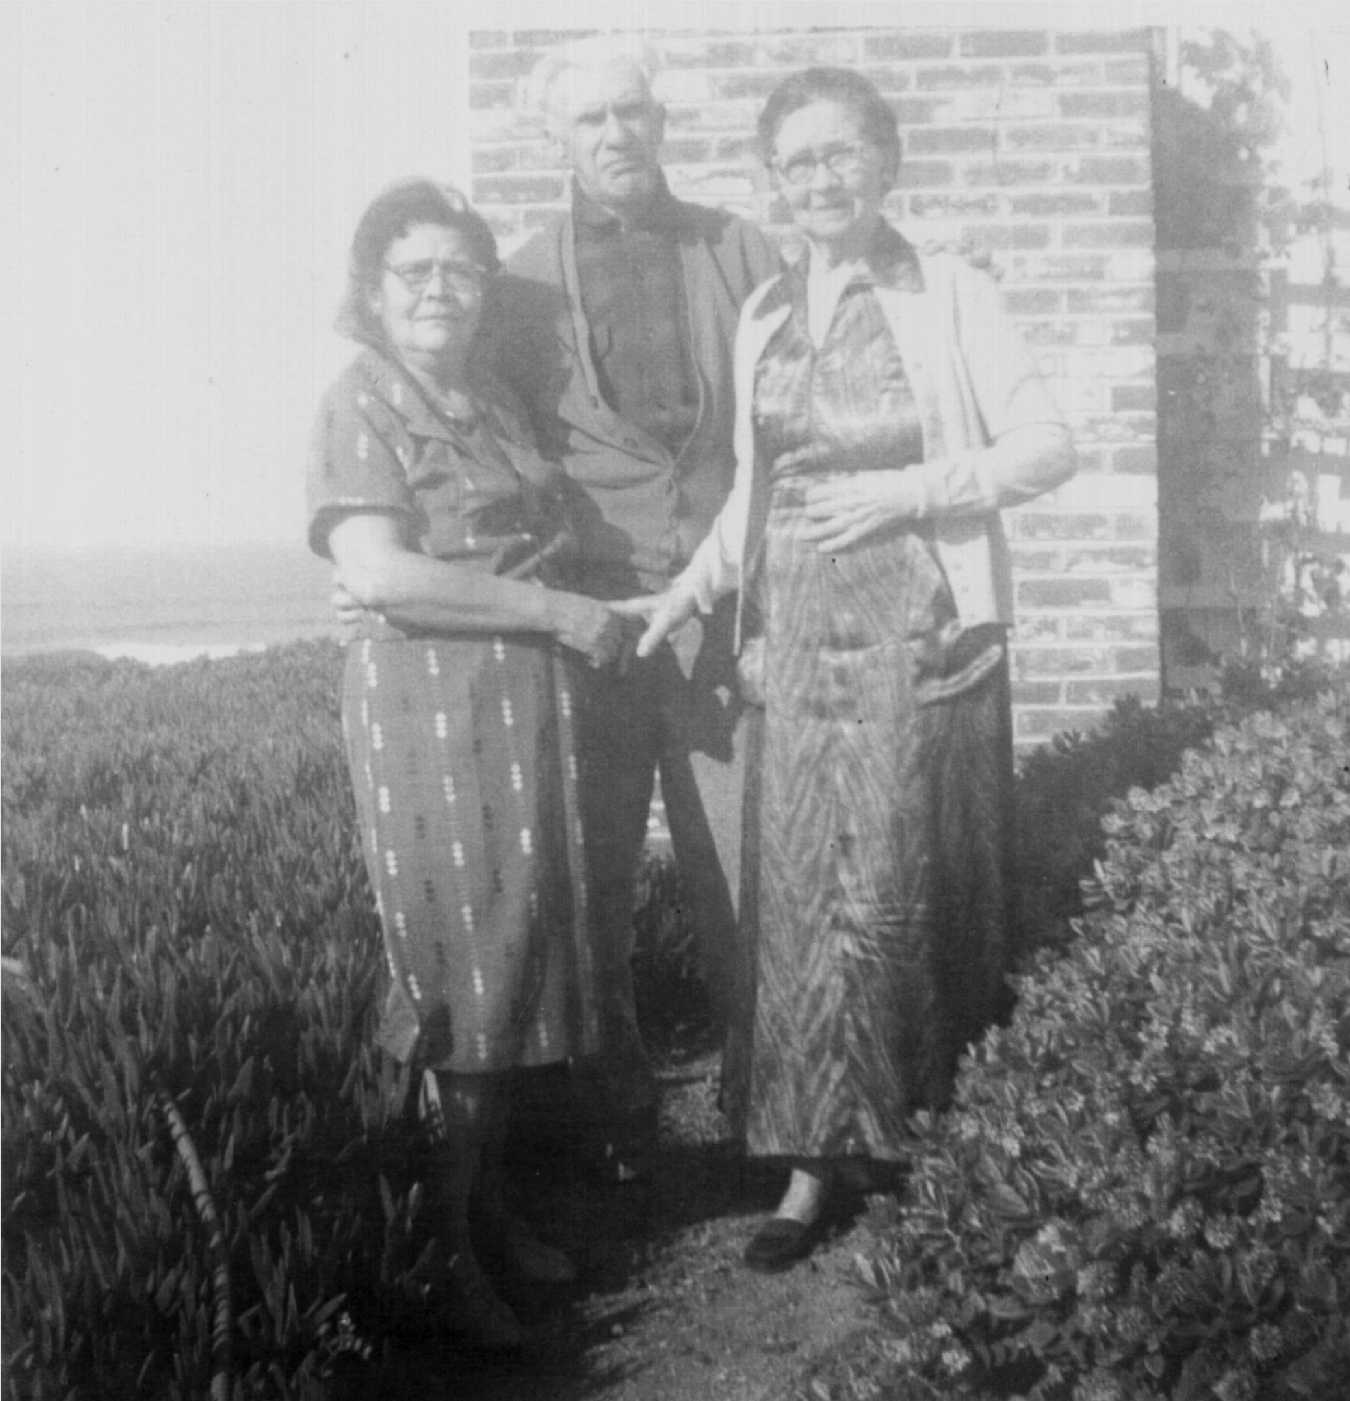 Left - Lillian Bodily Galbraith Peterson, Jane's sister, with friends on right